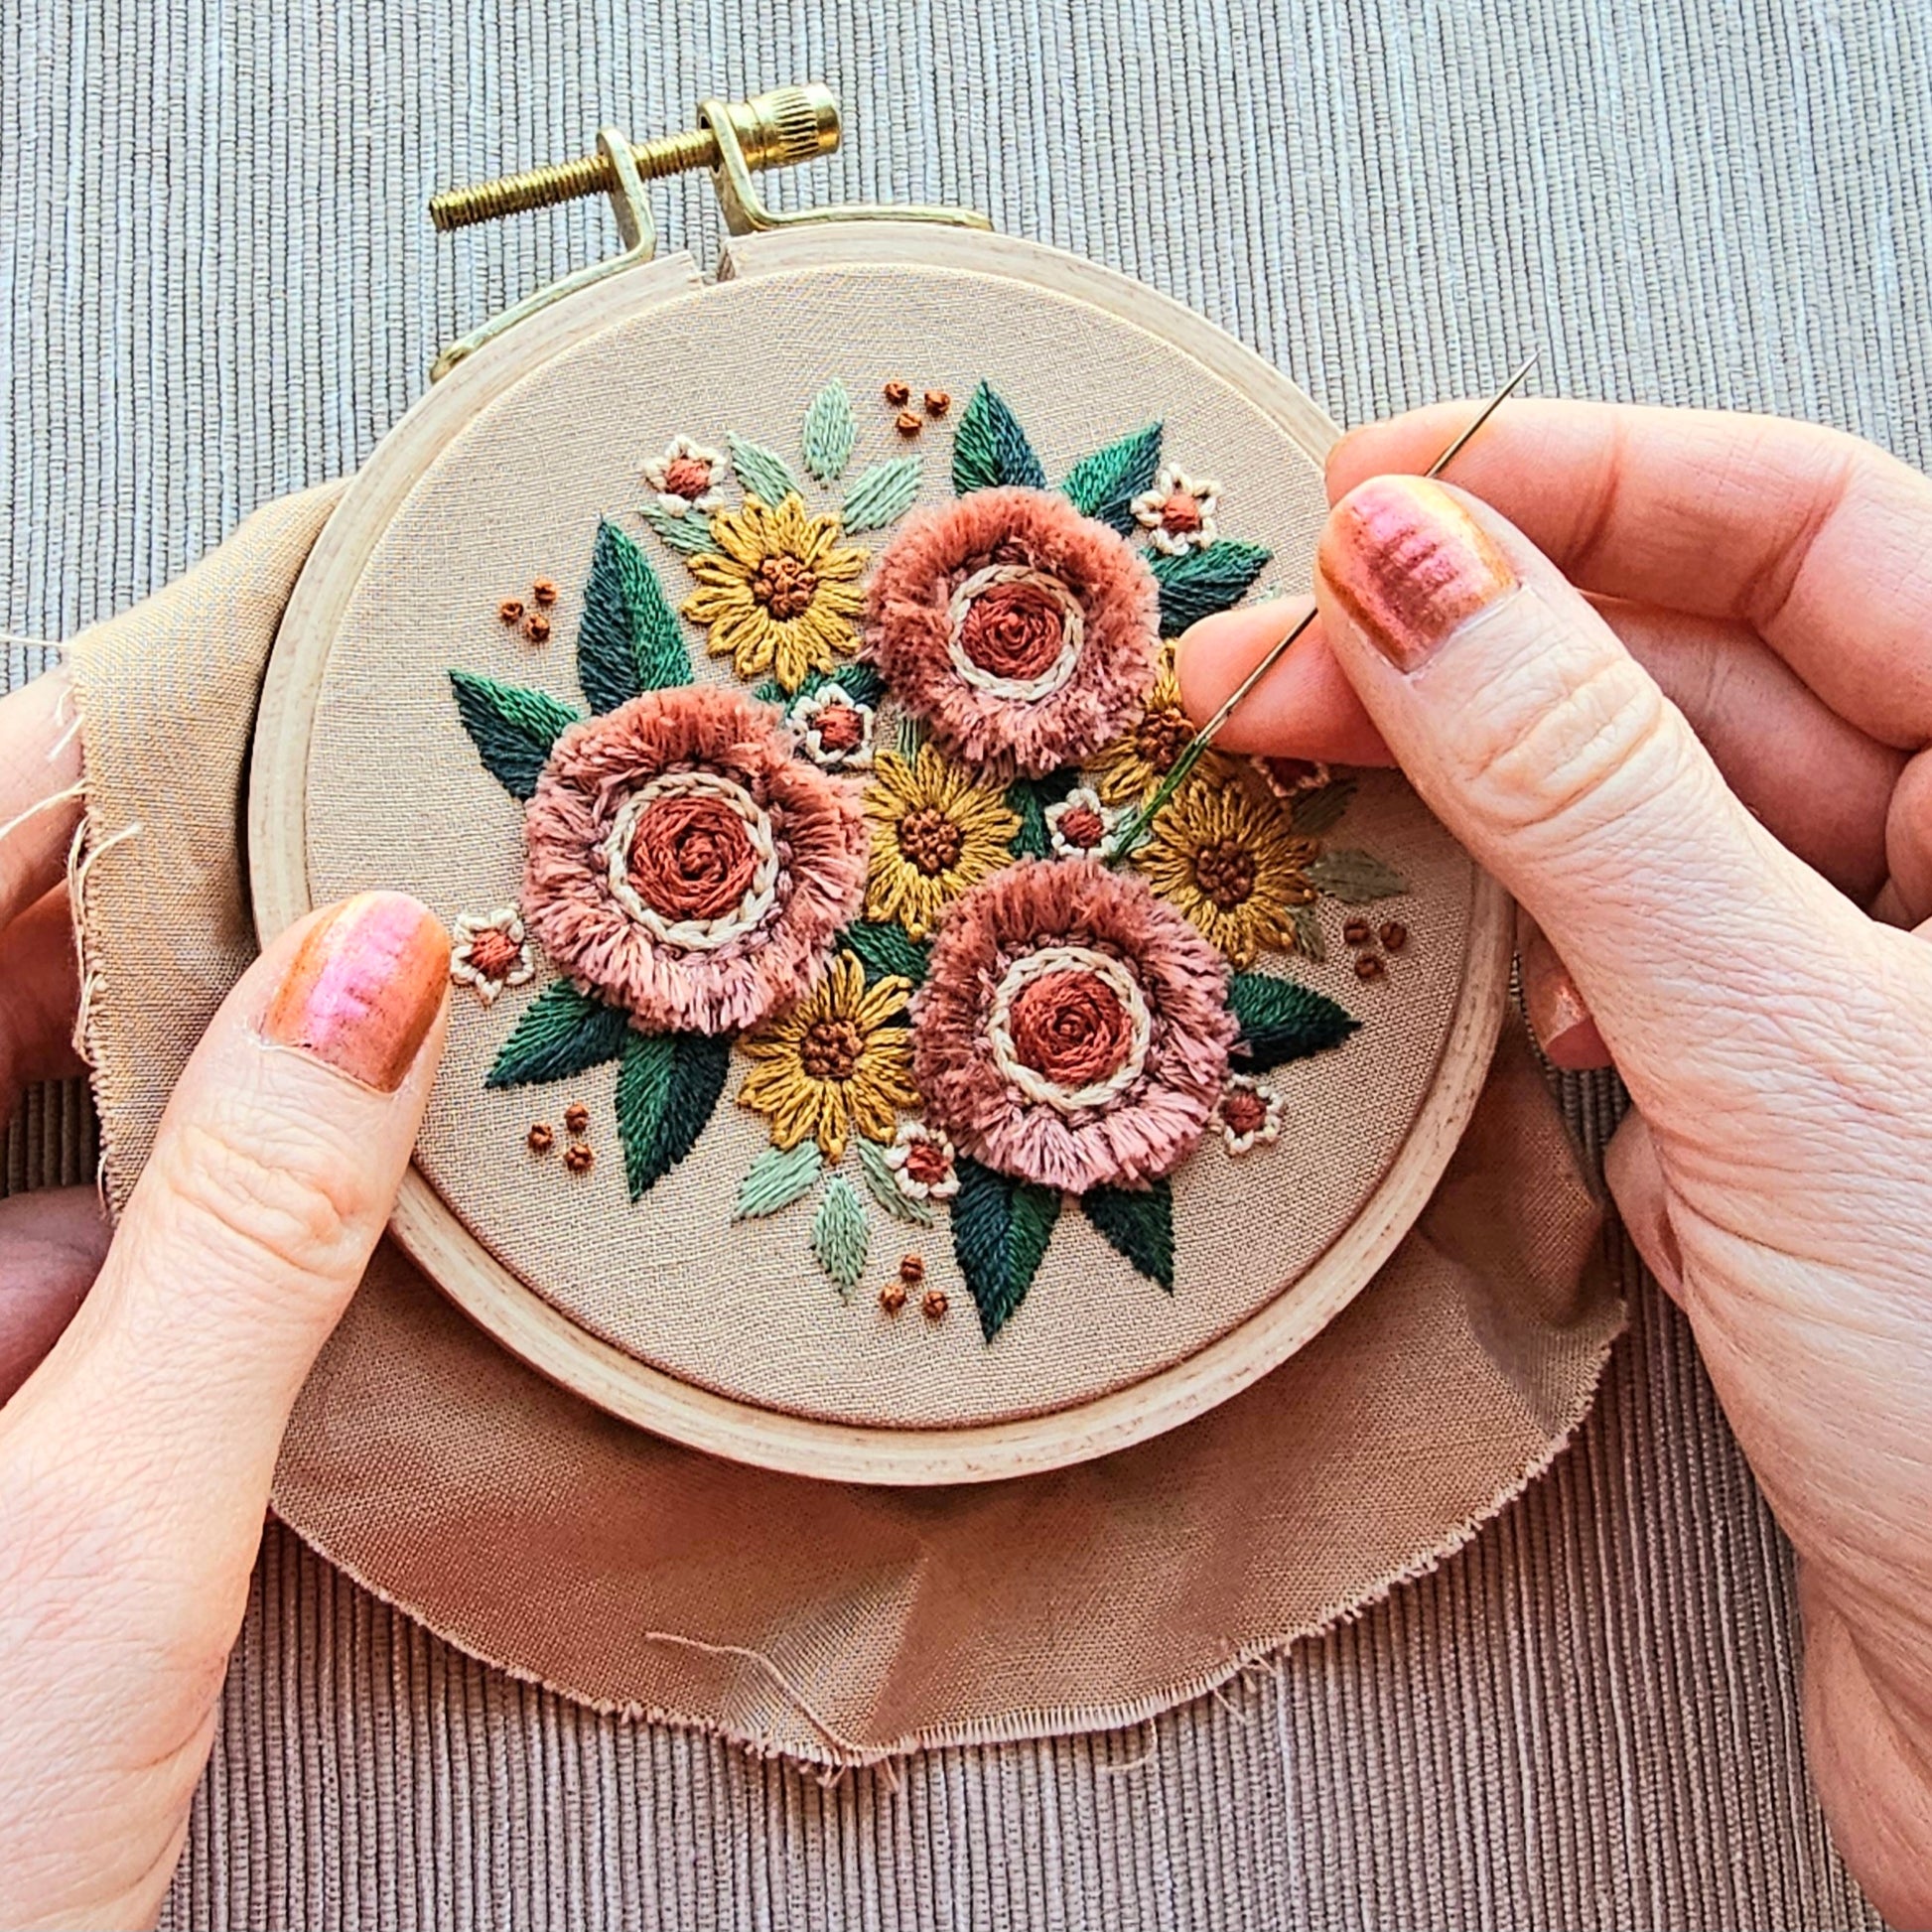 EMBROIDERY for Beginners - Learn the basics - New Floral embroidery kit is  now available 